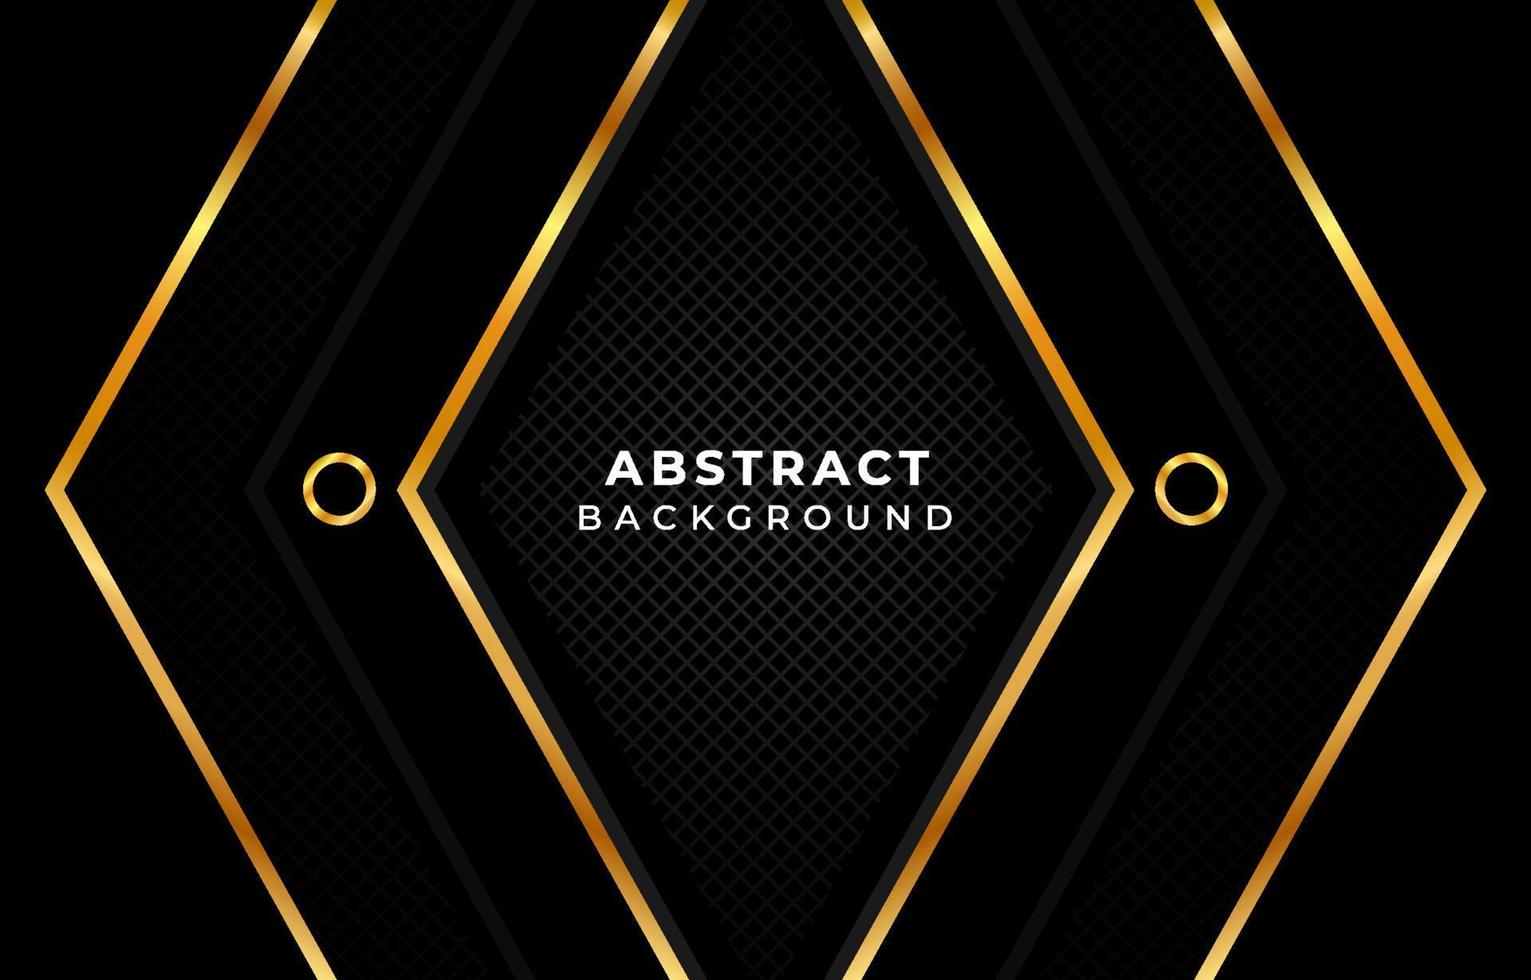 Abstract modern background design concept vector